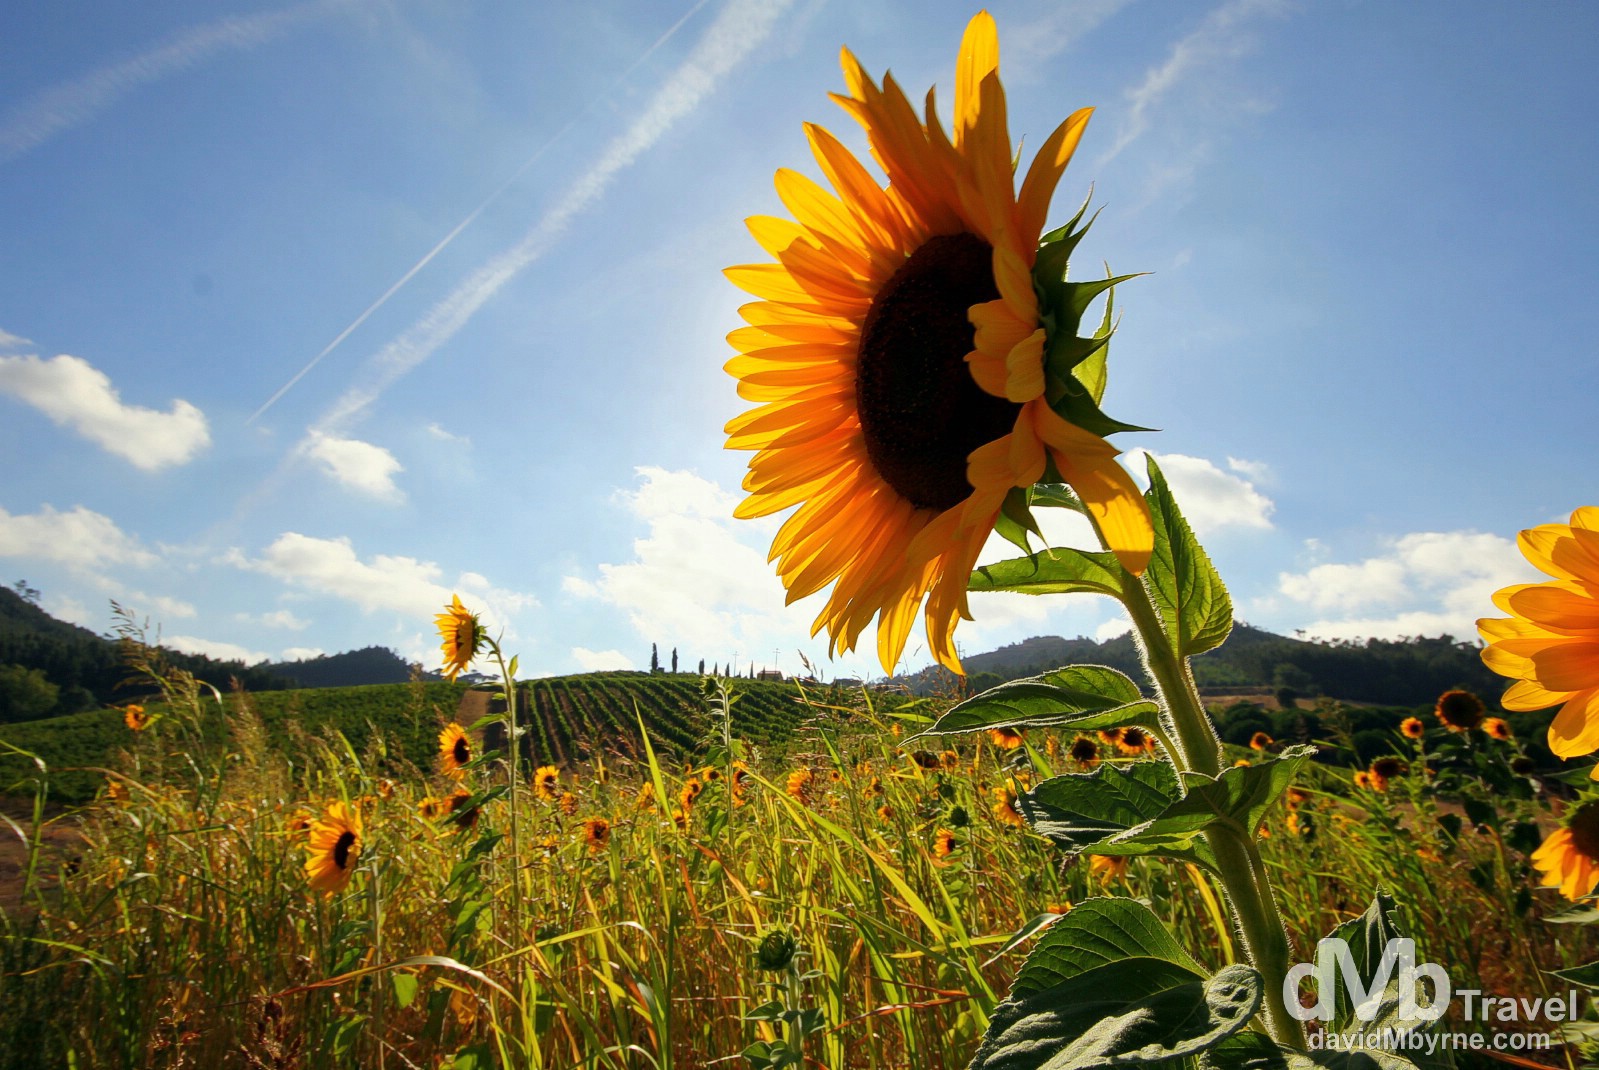 Sunflowers at sunset in the estate of Quinta de Sant’Ana in the hills above Gradil, Portugal. August 23rd 2013. 